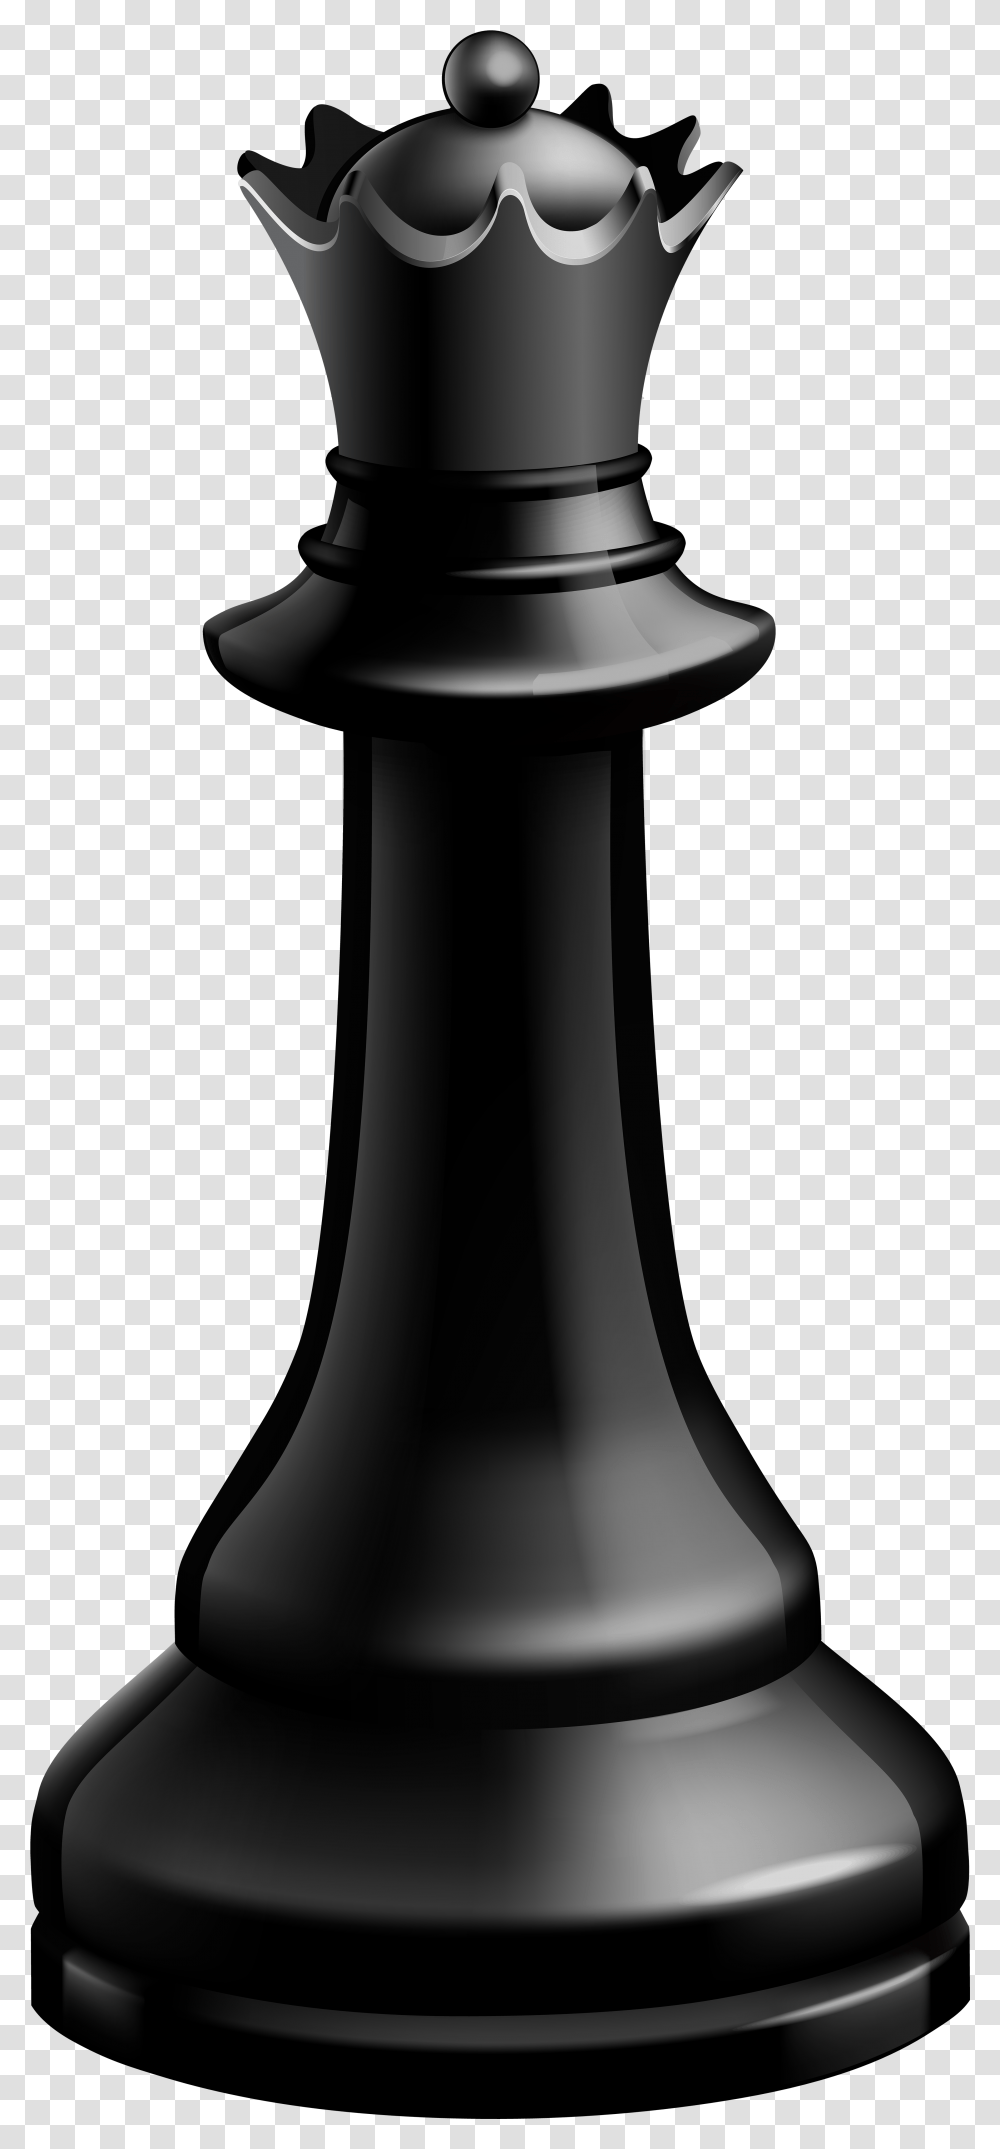 Chess Piece Queen Knight Chessboard Source King Chess Piece, Bottle, Lamp, Pin, Beverage Transparent Png